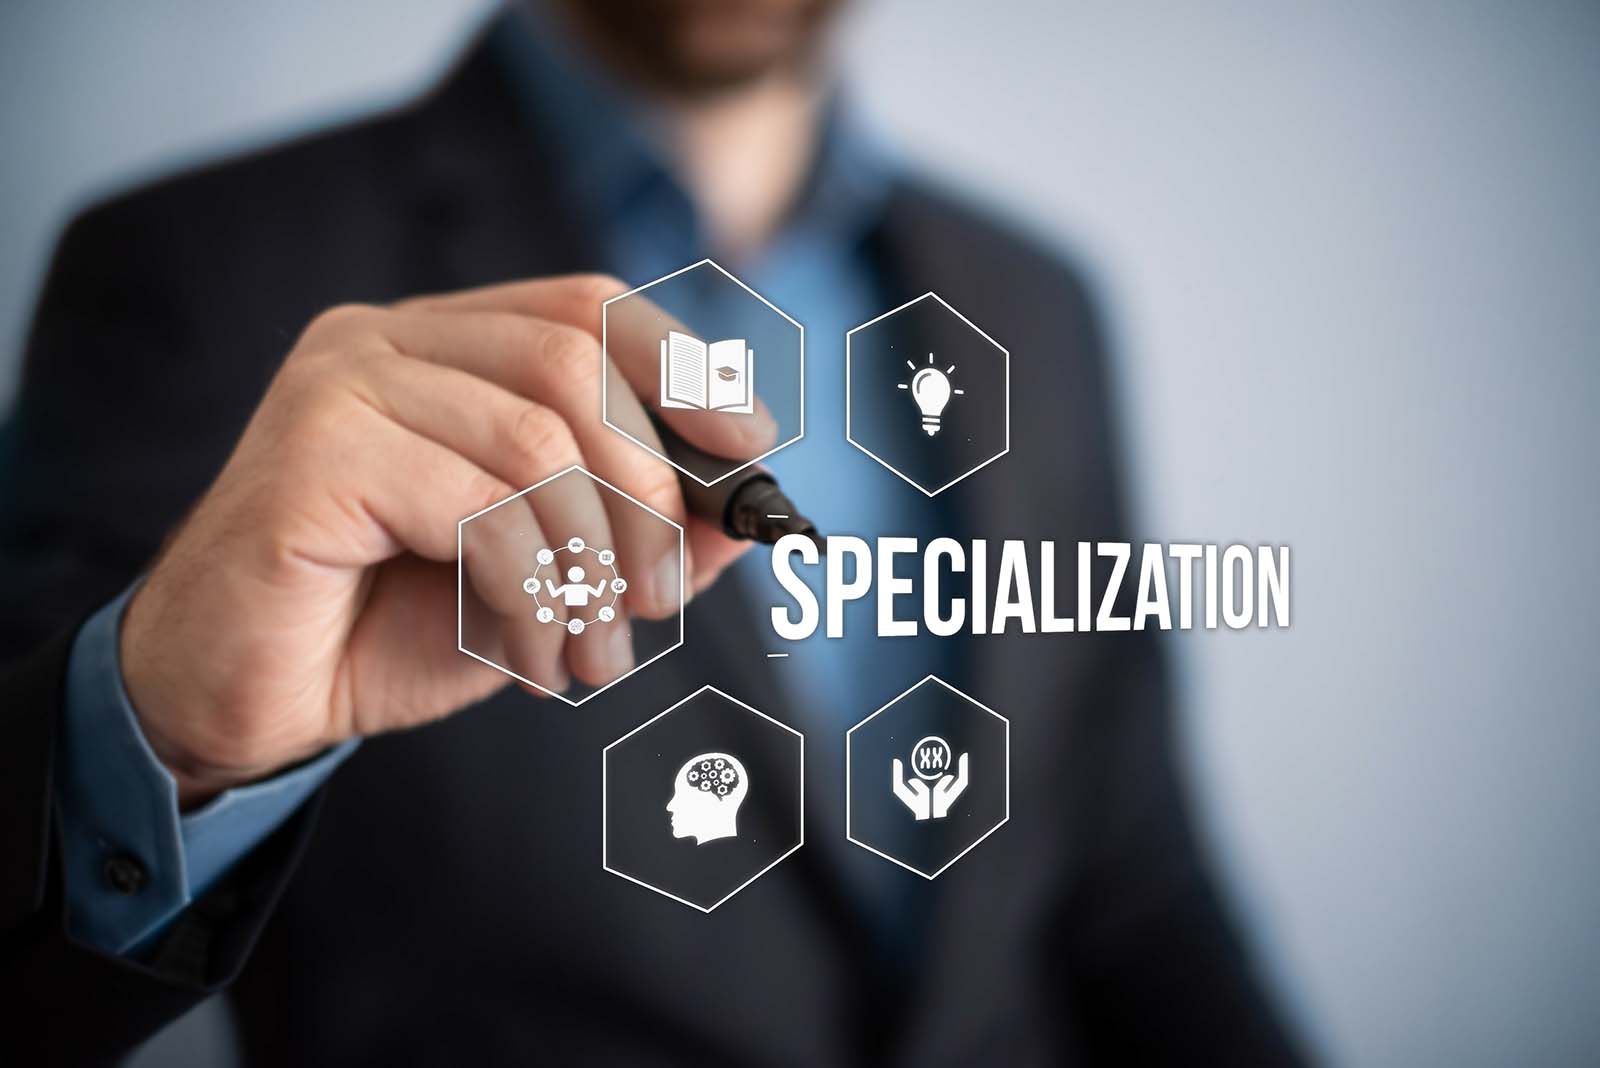 man holding pen touching the word "specialization" floating in air with symbols